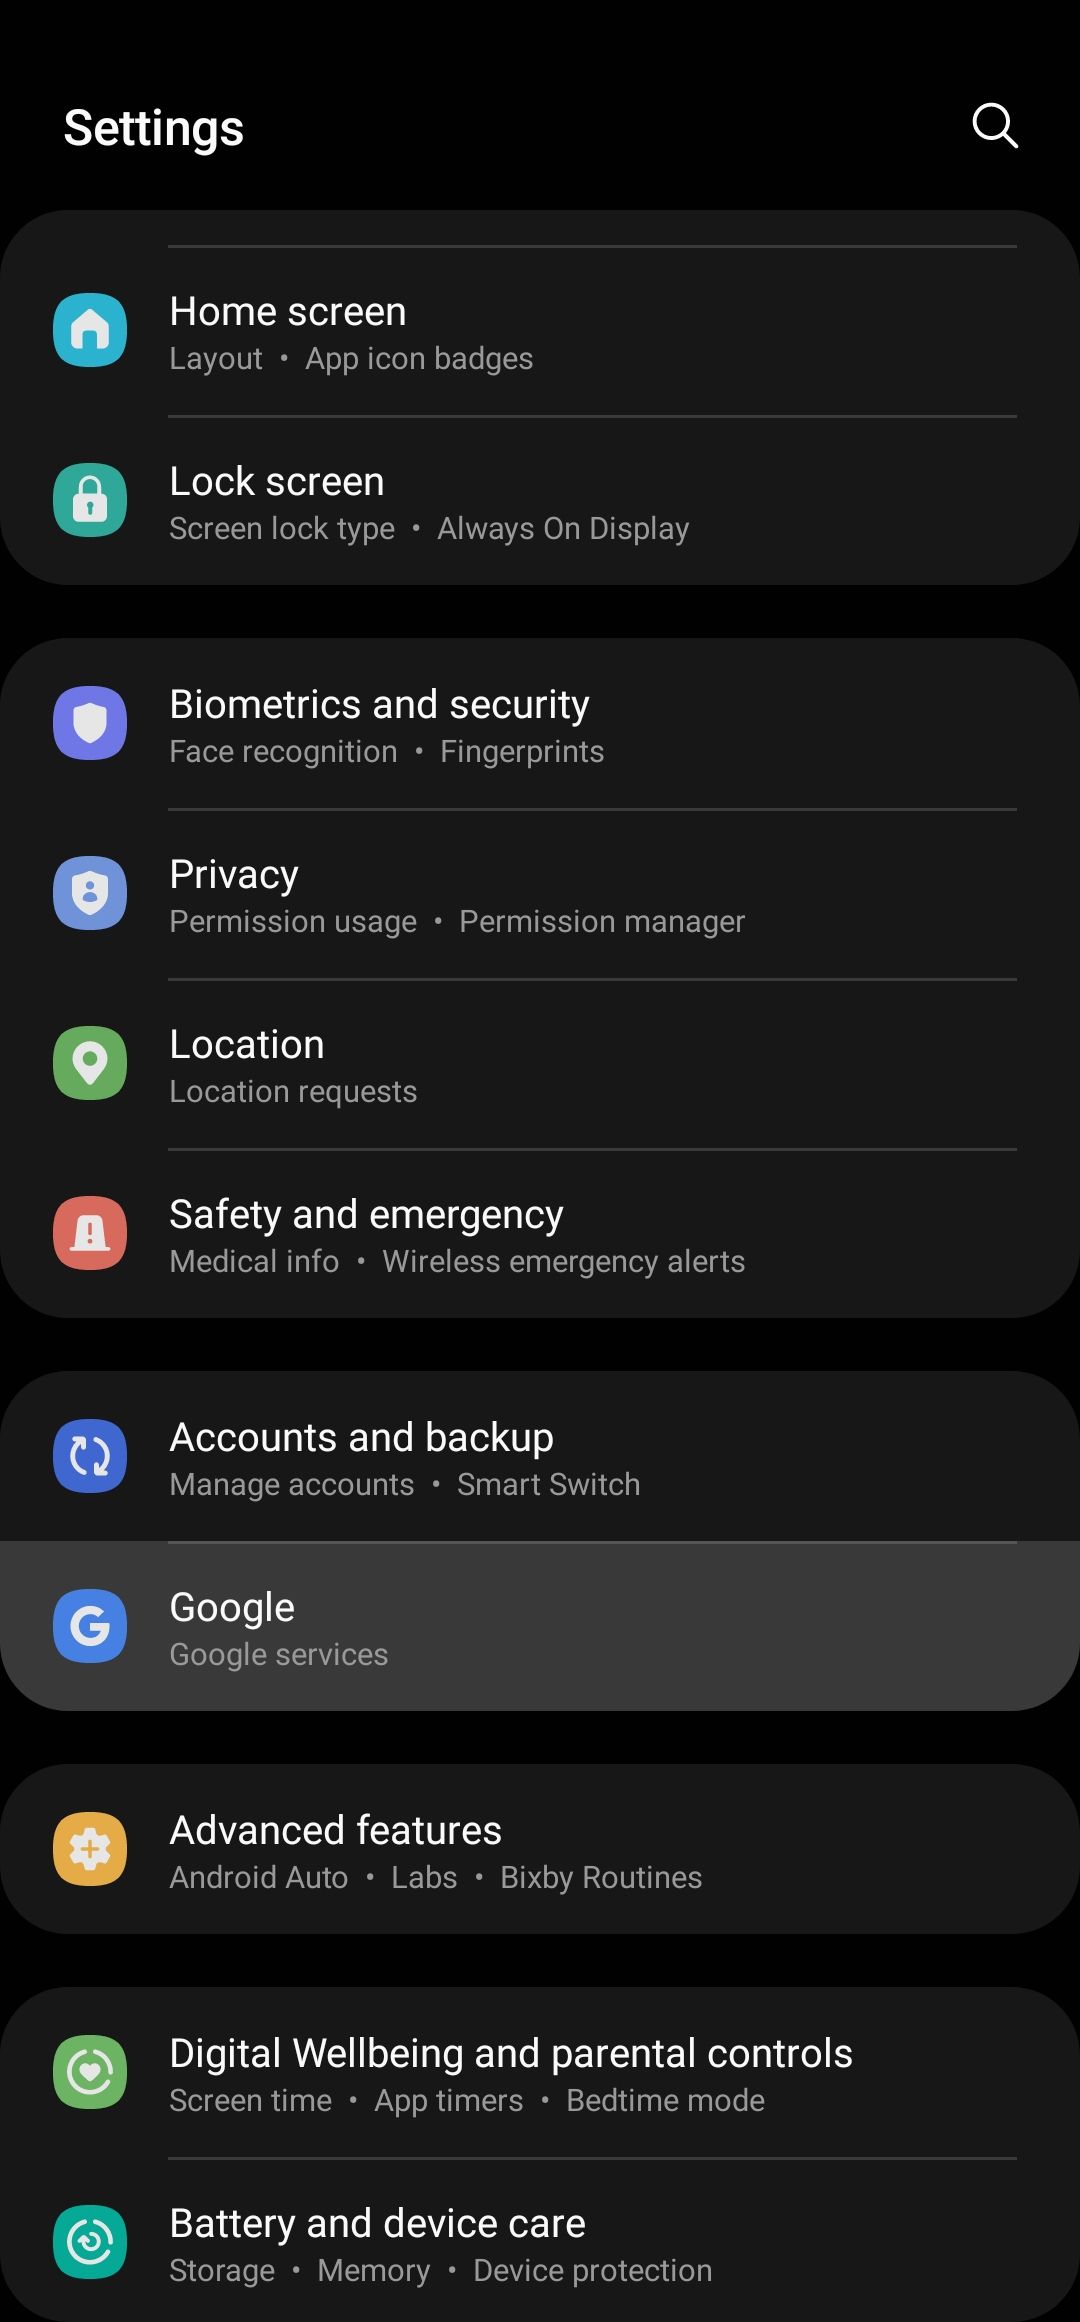 Select 'Google' from the Settings app